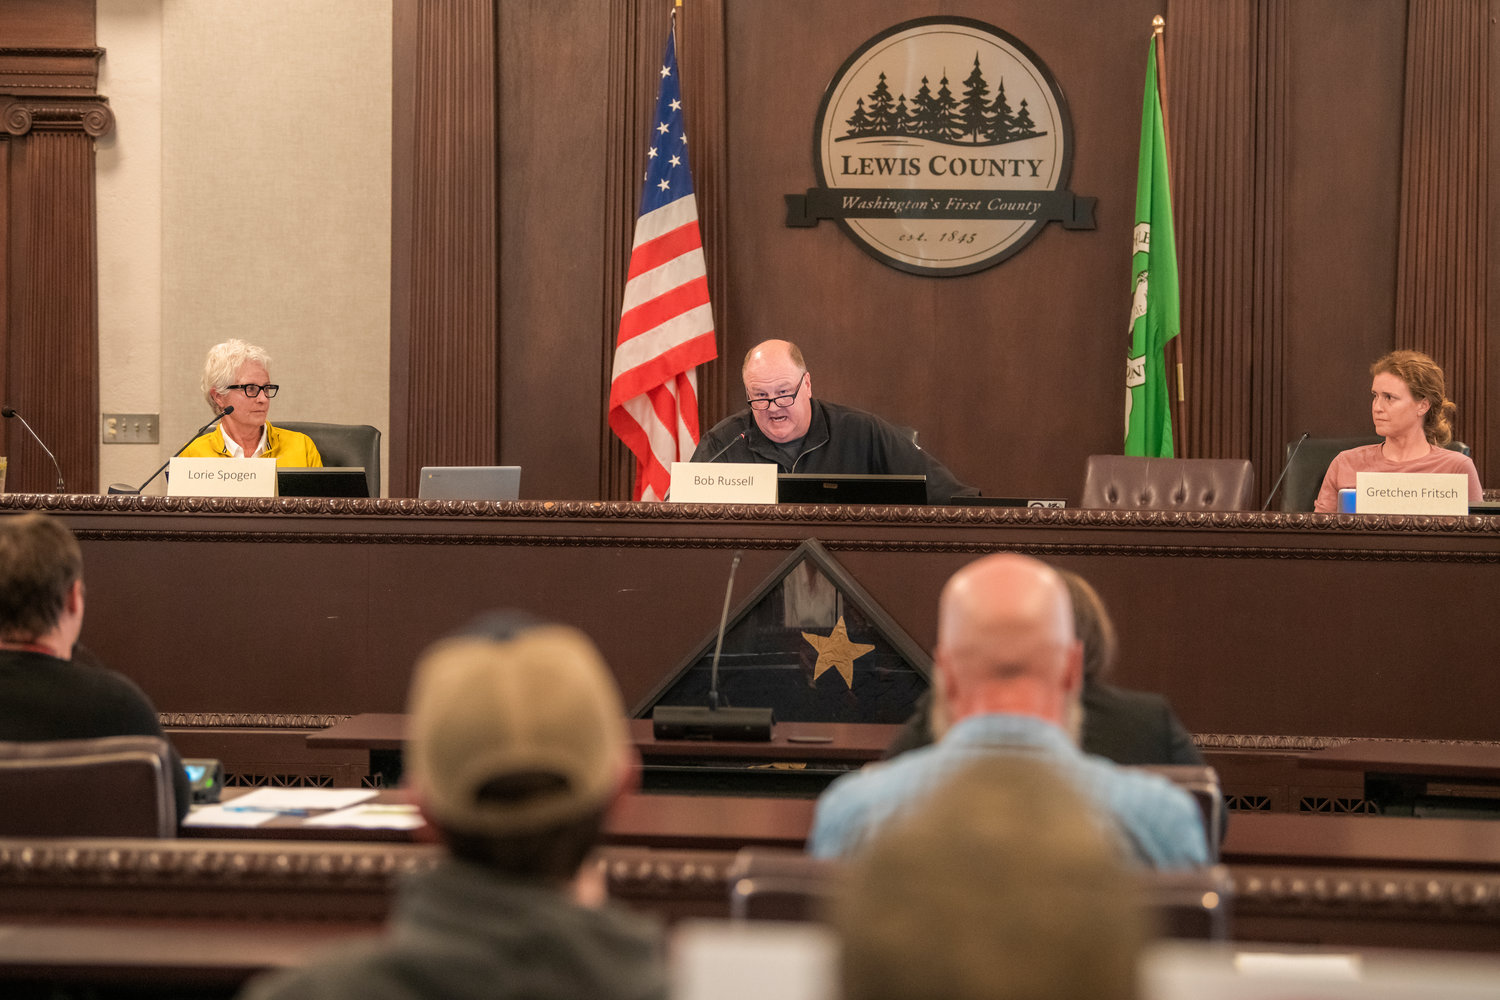 Lewis County Planning Commissioners Lorie Spogen, Bob Russell and Gretchen Fritsch workshop a rezone proposal on YMCA land north of Mineral Lake in the Lewis County Courthouse Tuesday.